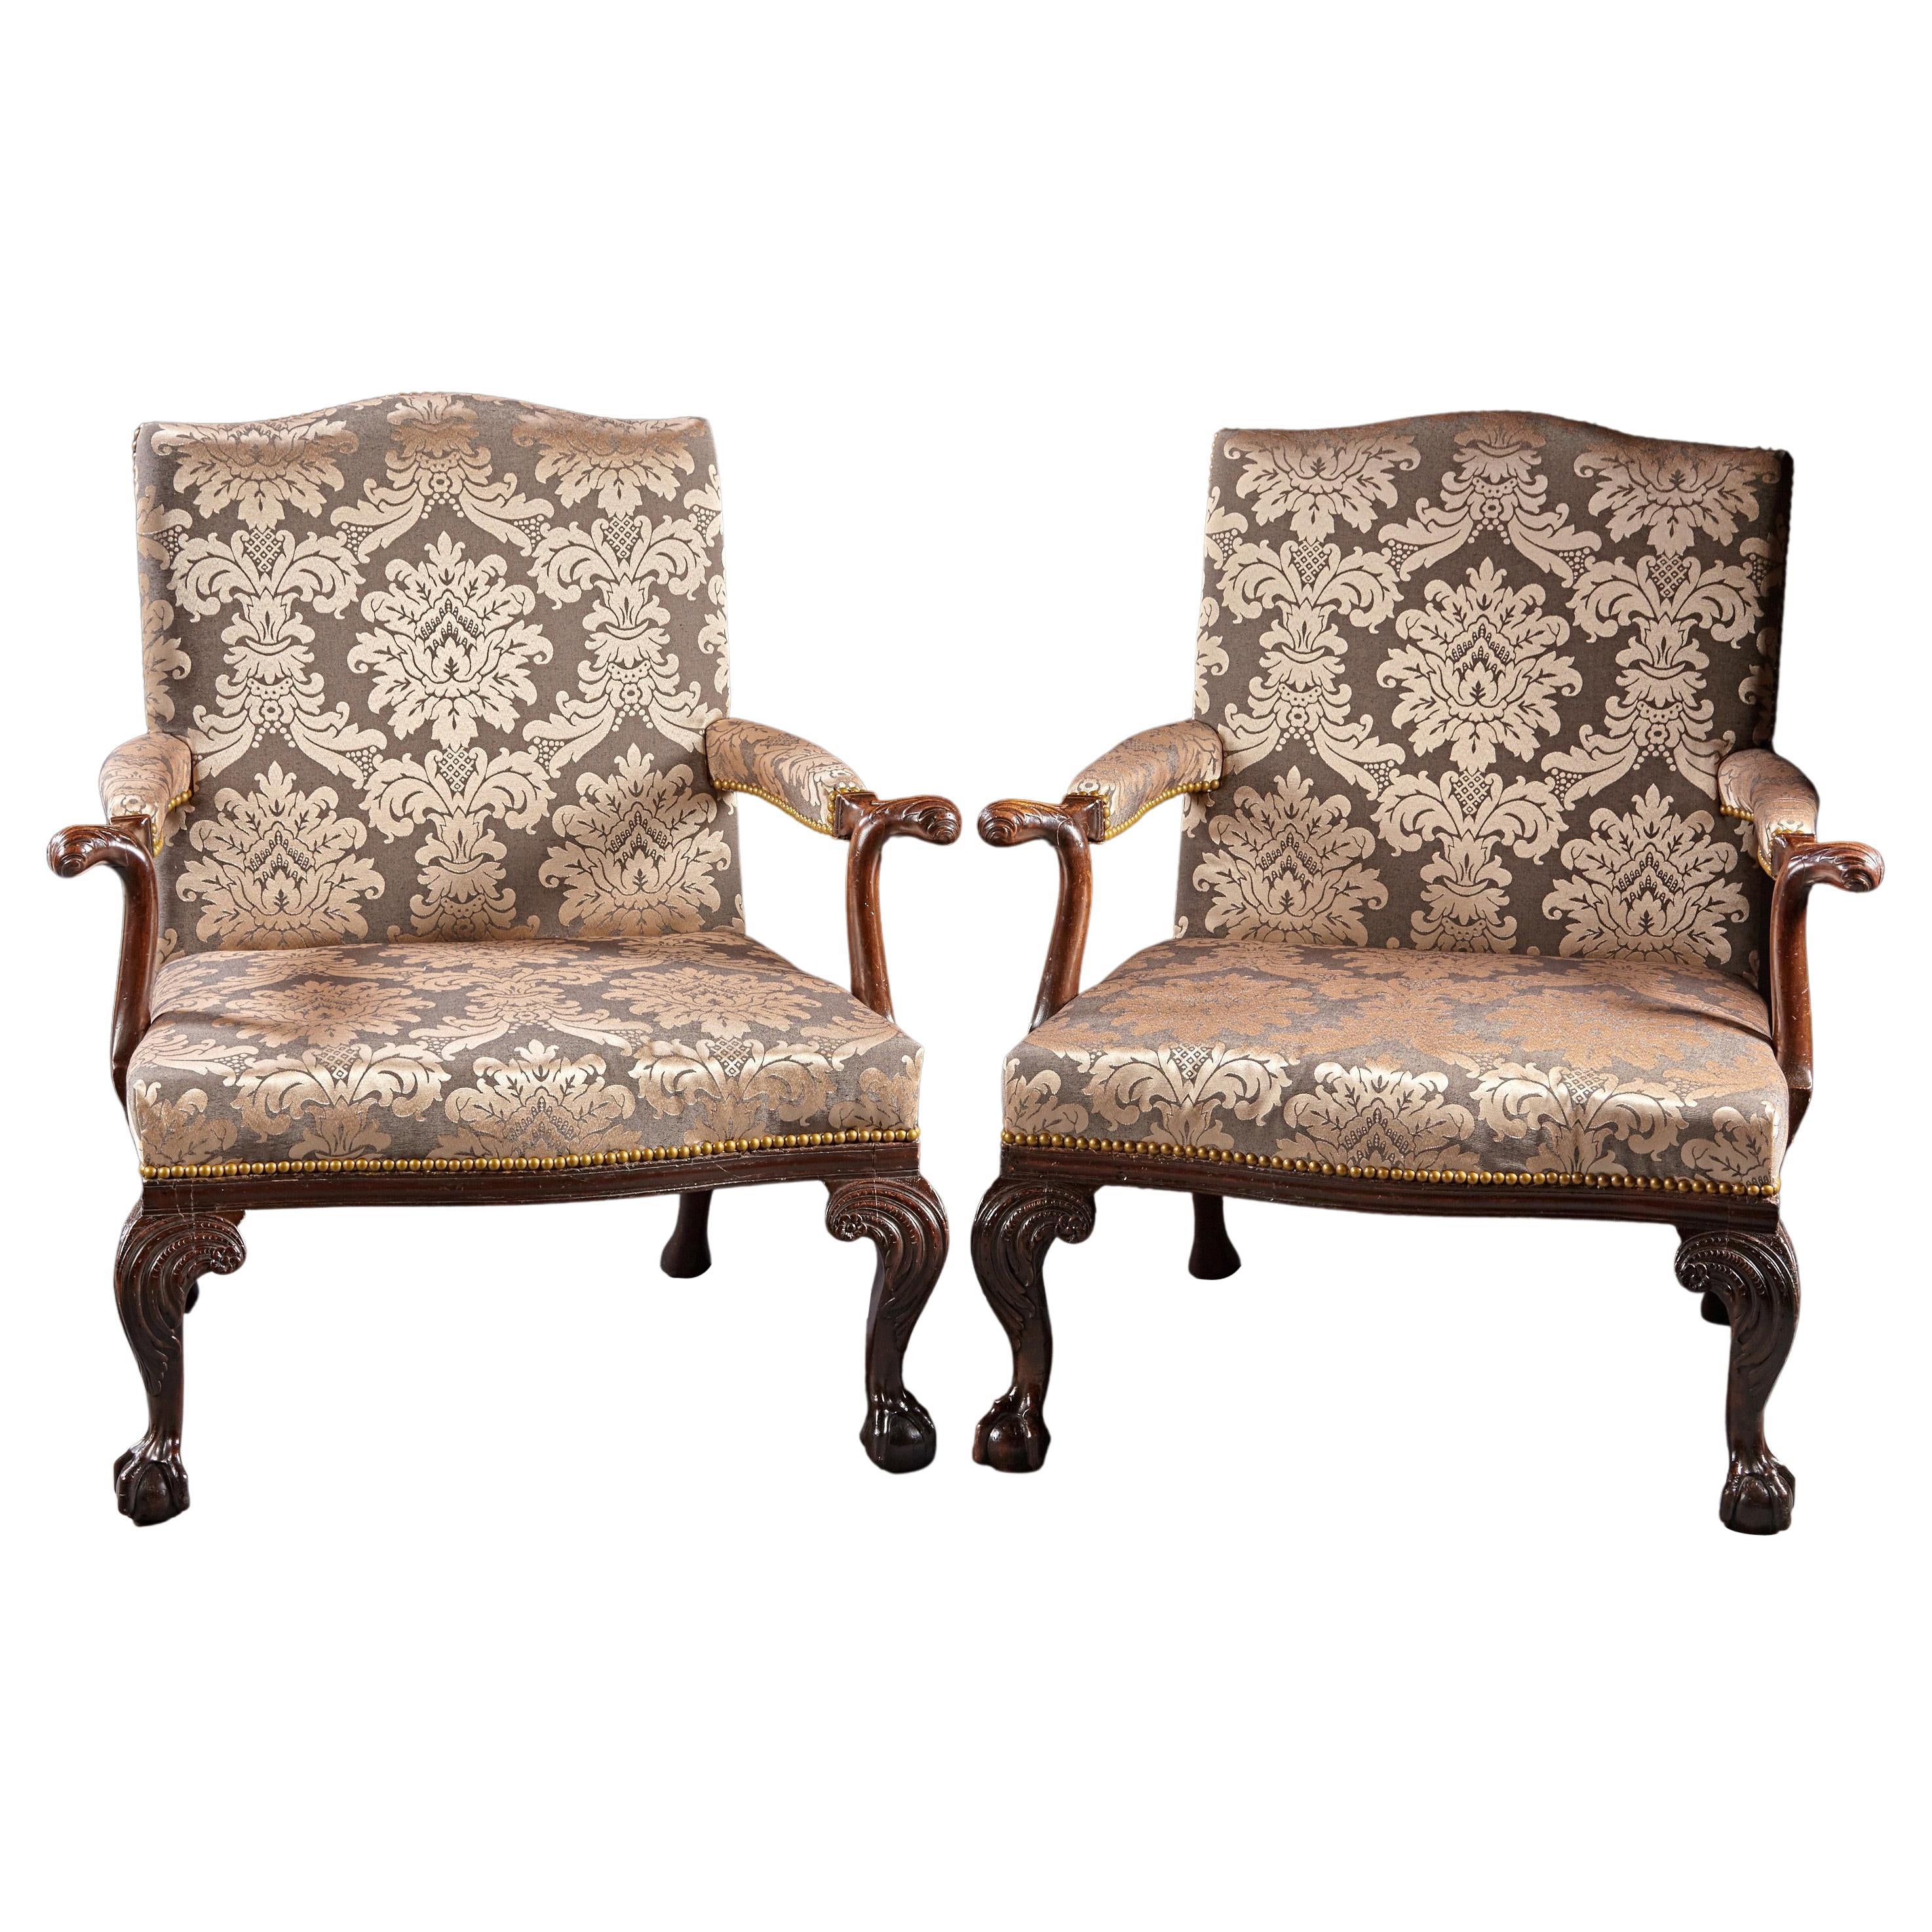 Pair of 18th Century Carved Mahogany Chippendale Period Gainsborough Armchairs